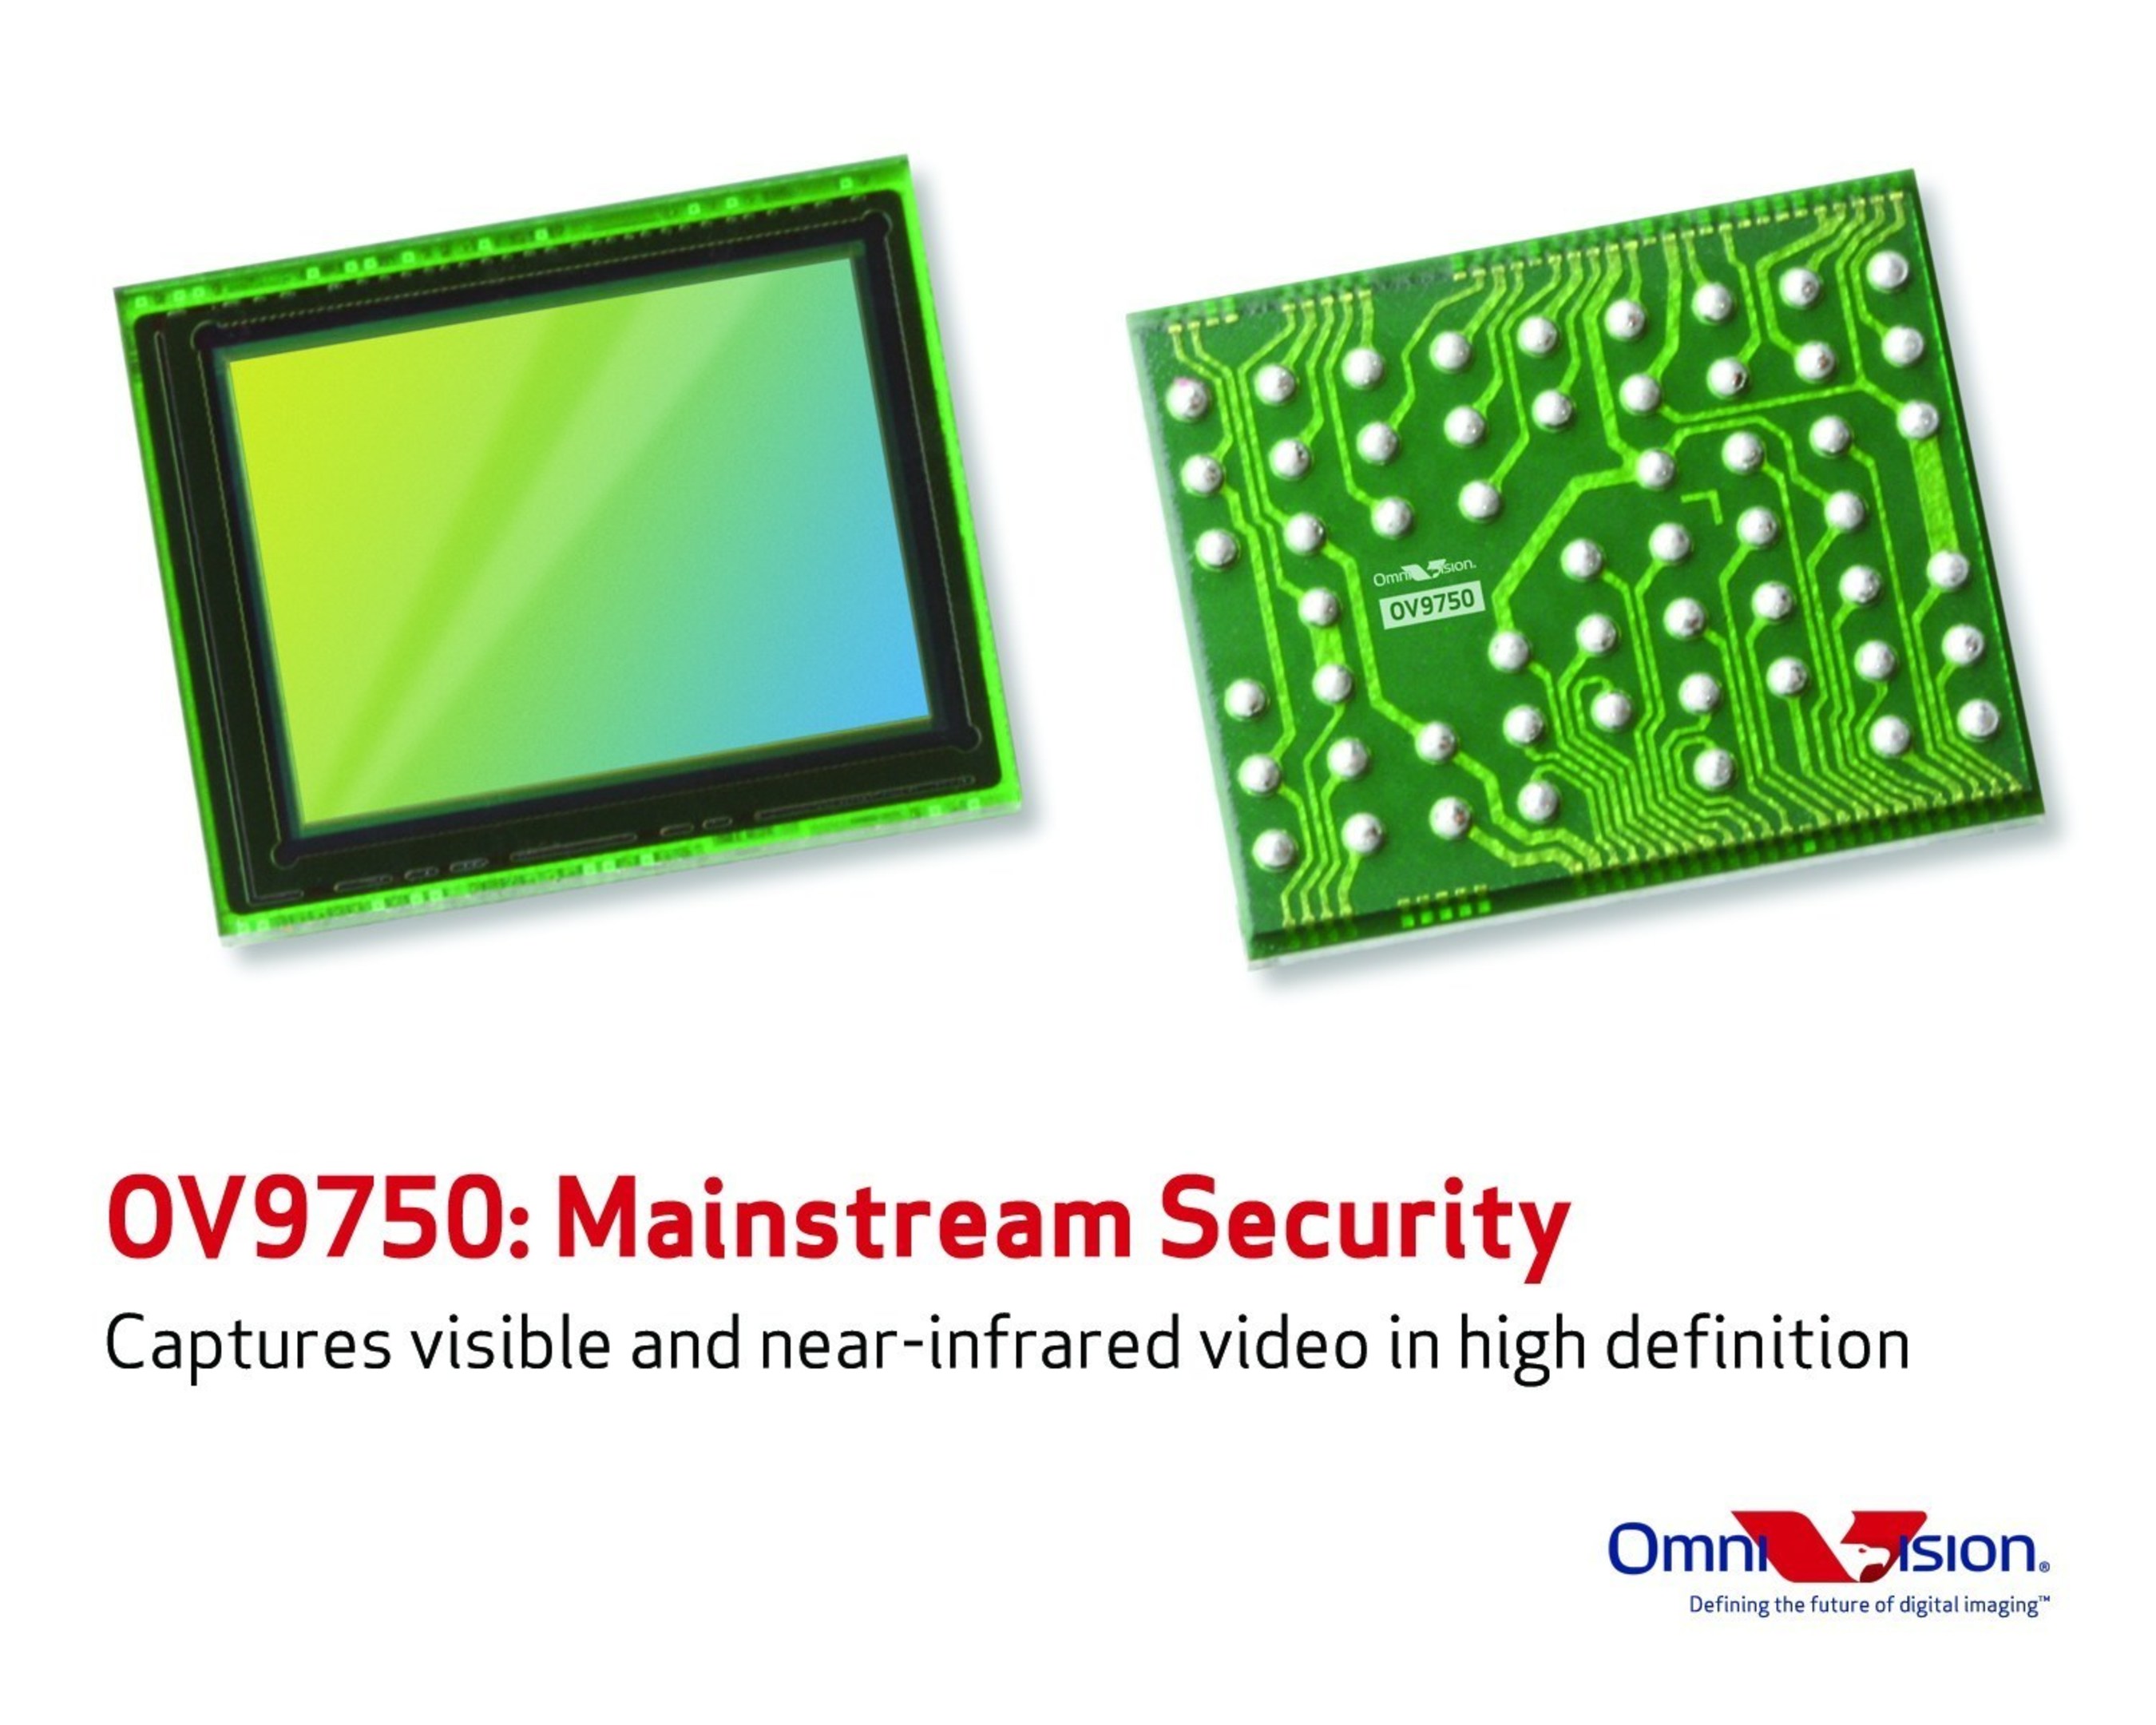 OV9750 captures visible and near-infrared video in HD for mainstream security systems.